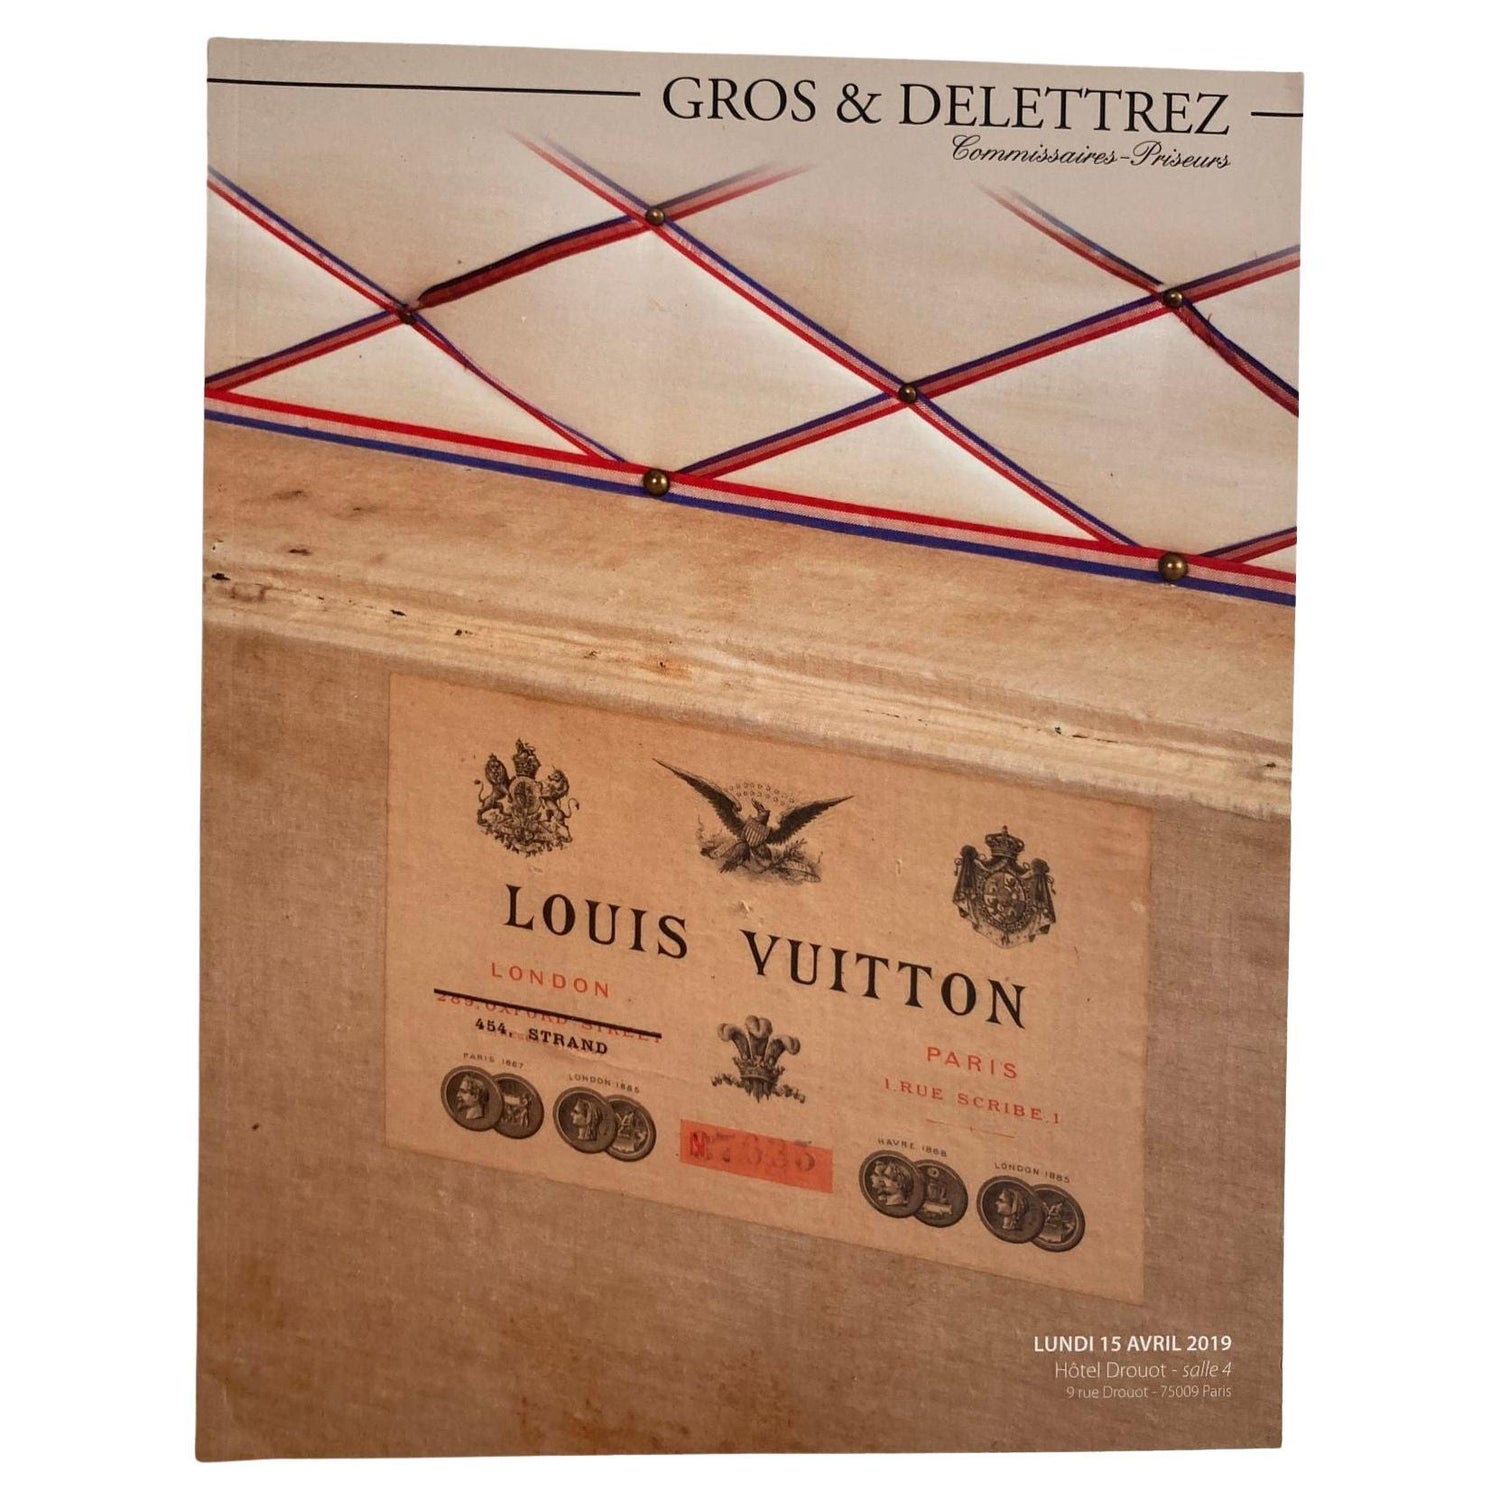 Louis Vuitton Trophy Trunks Recognized in New Assouline Coffee Table Book